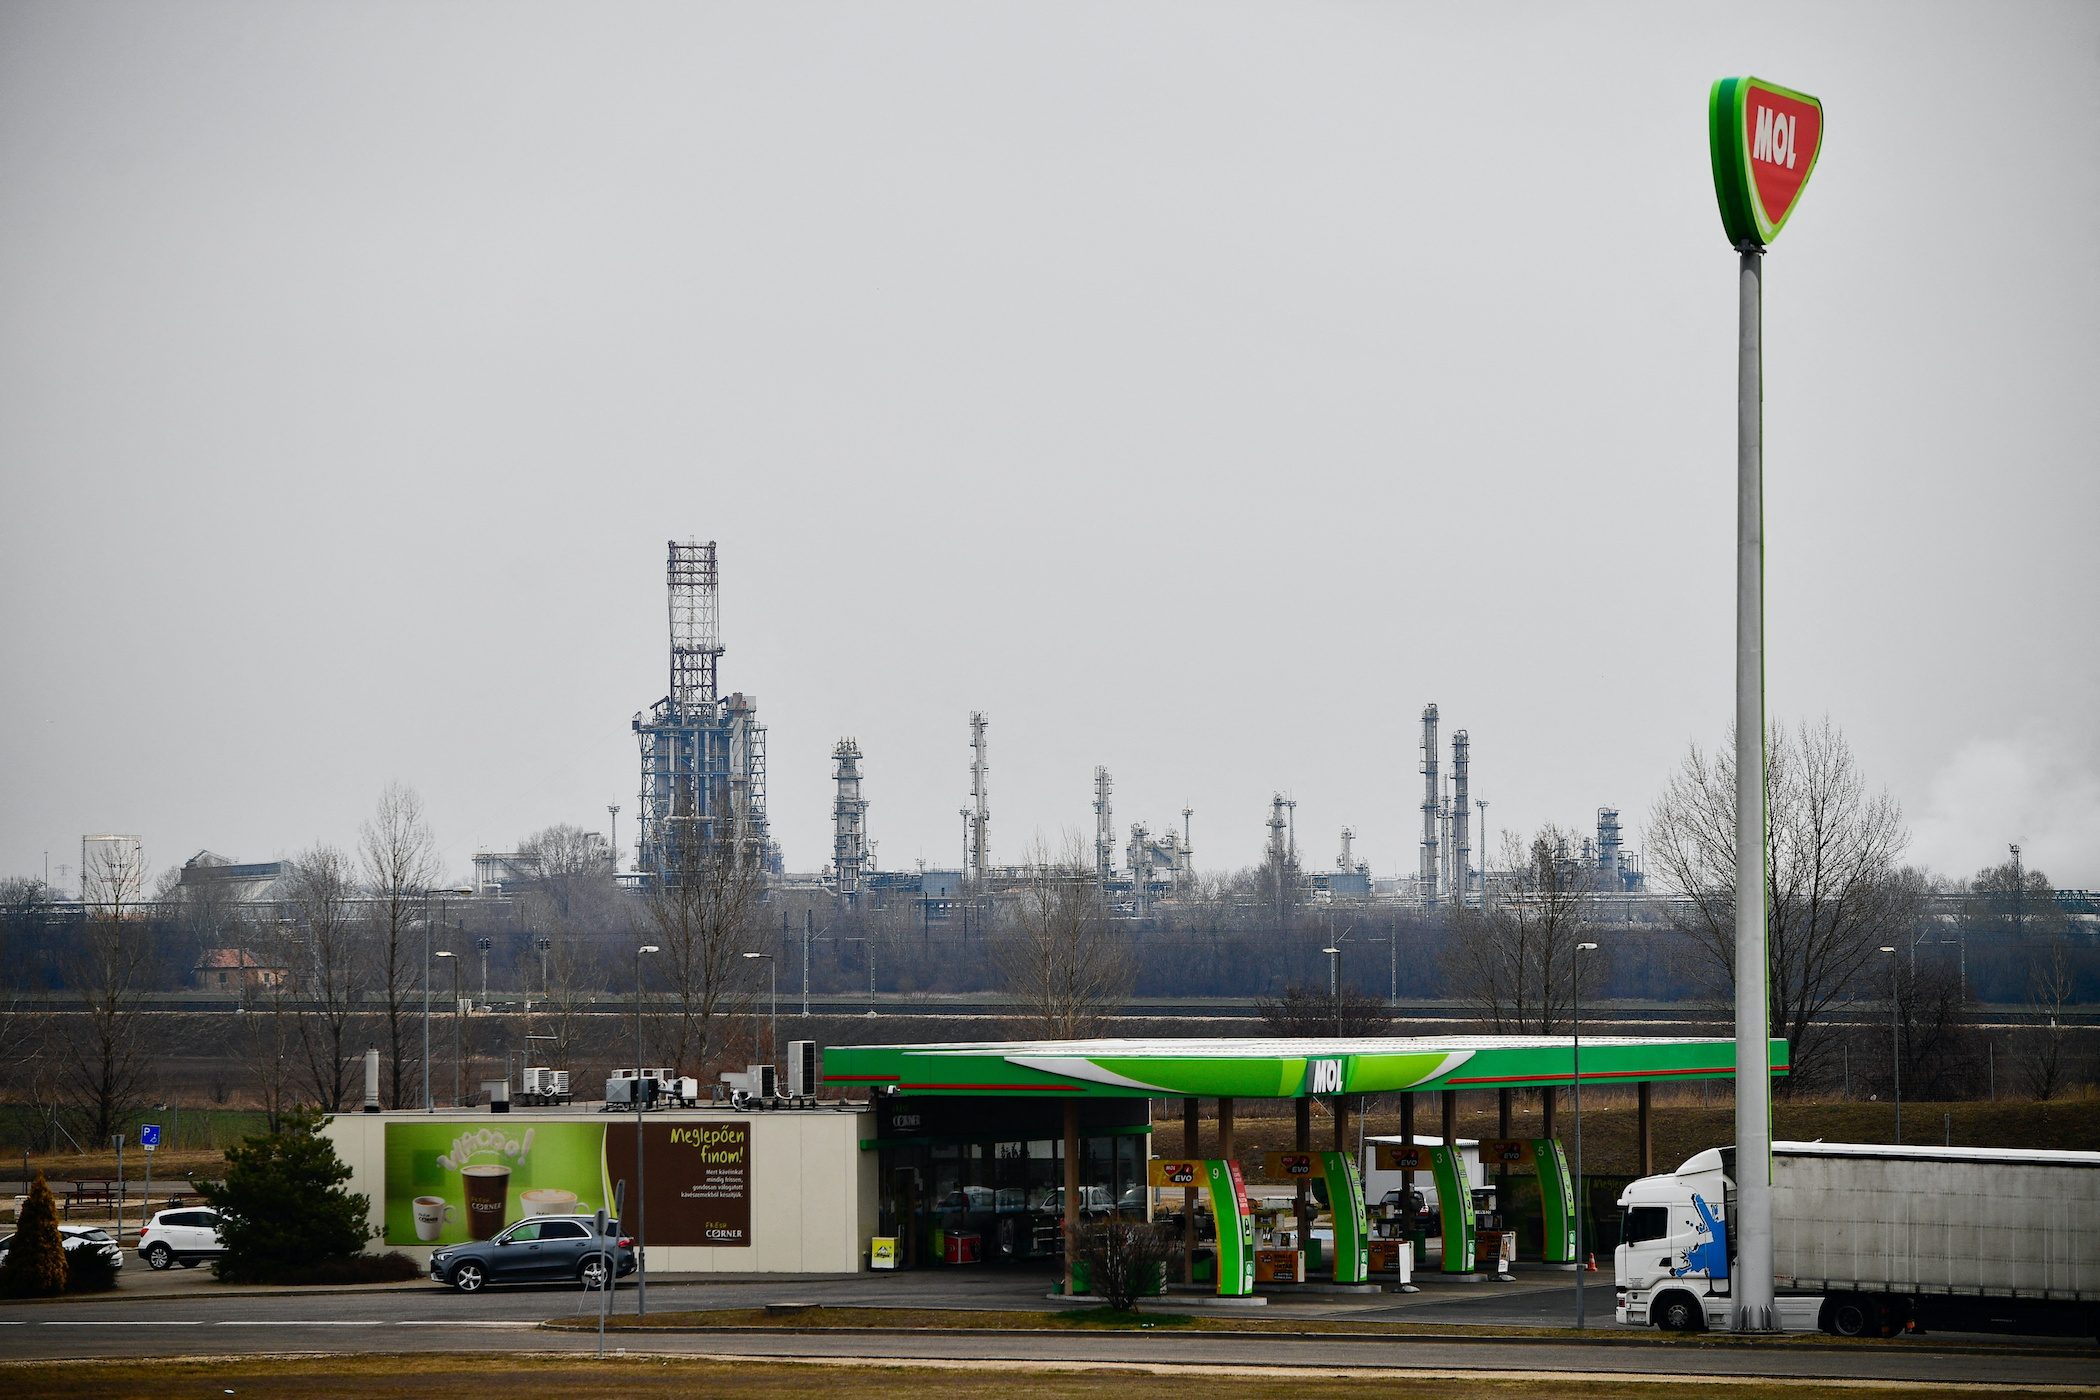 Europe can learn lessons from 1970s oil shock as rationing looms